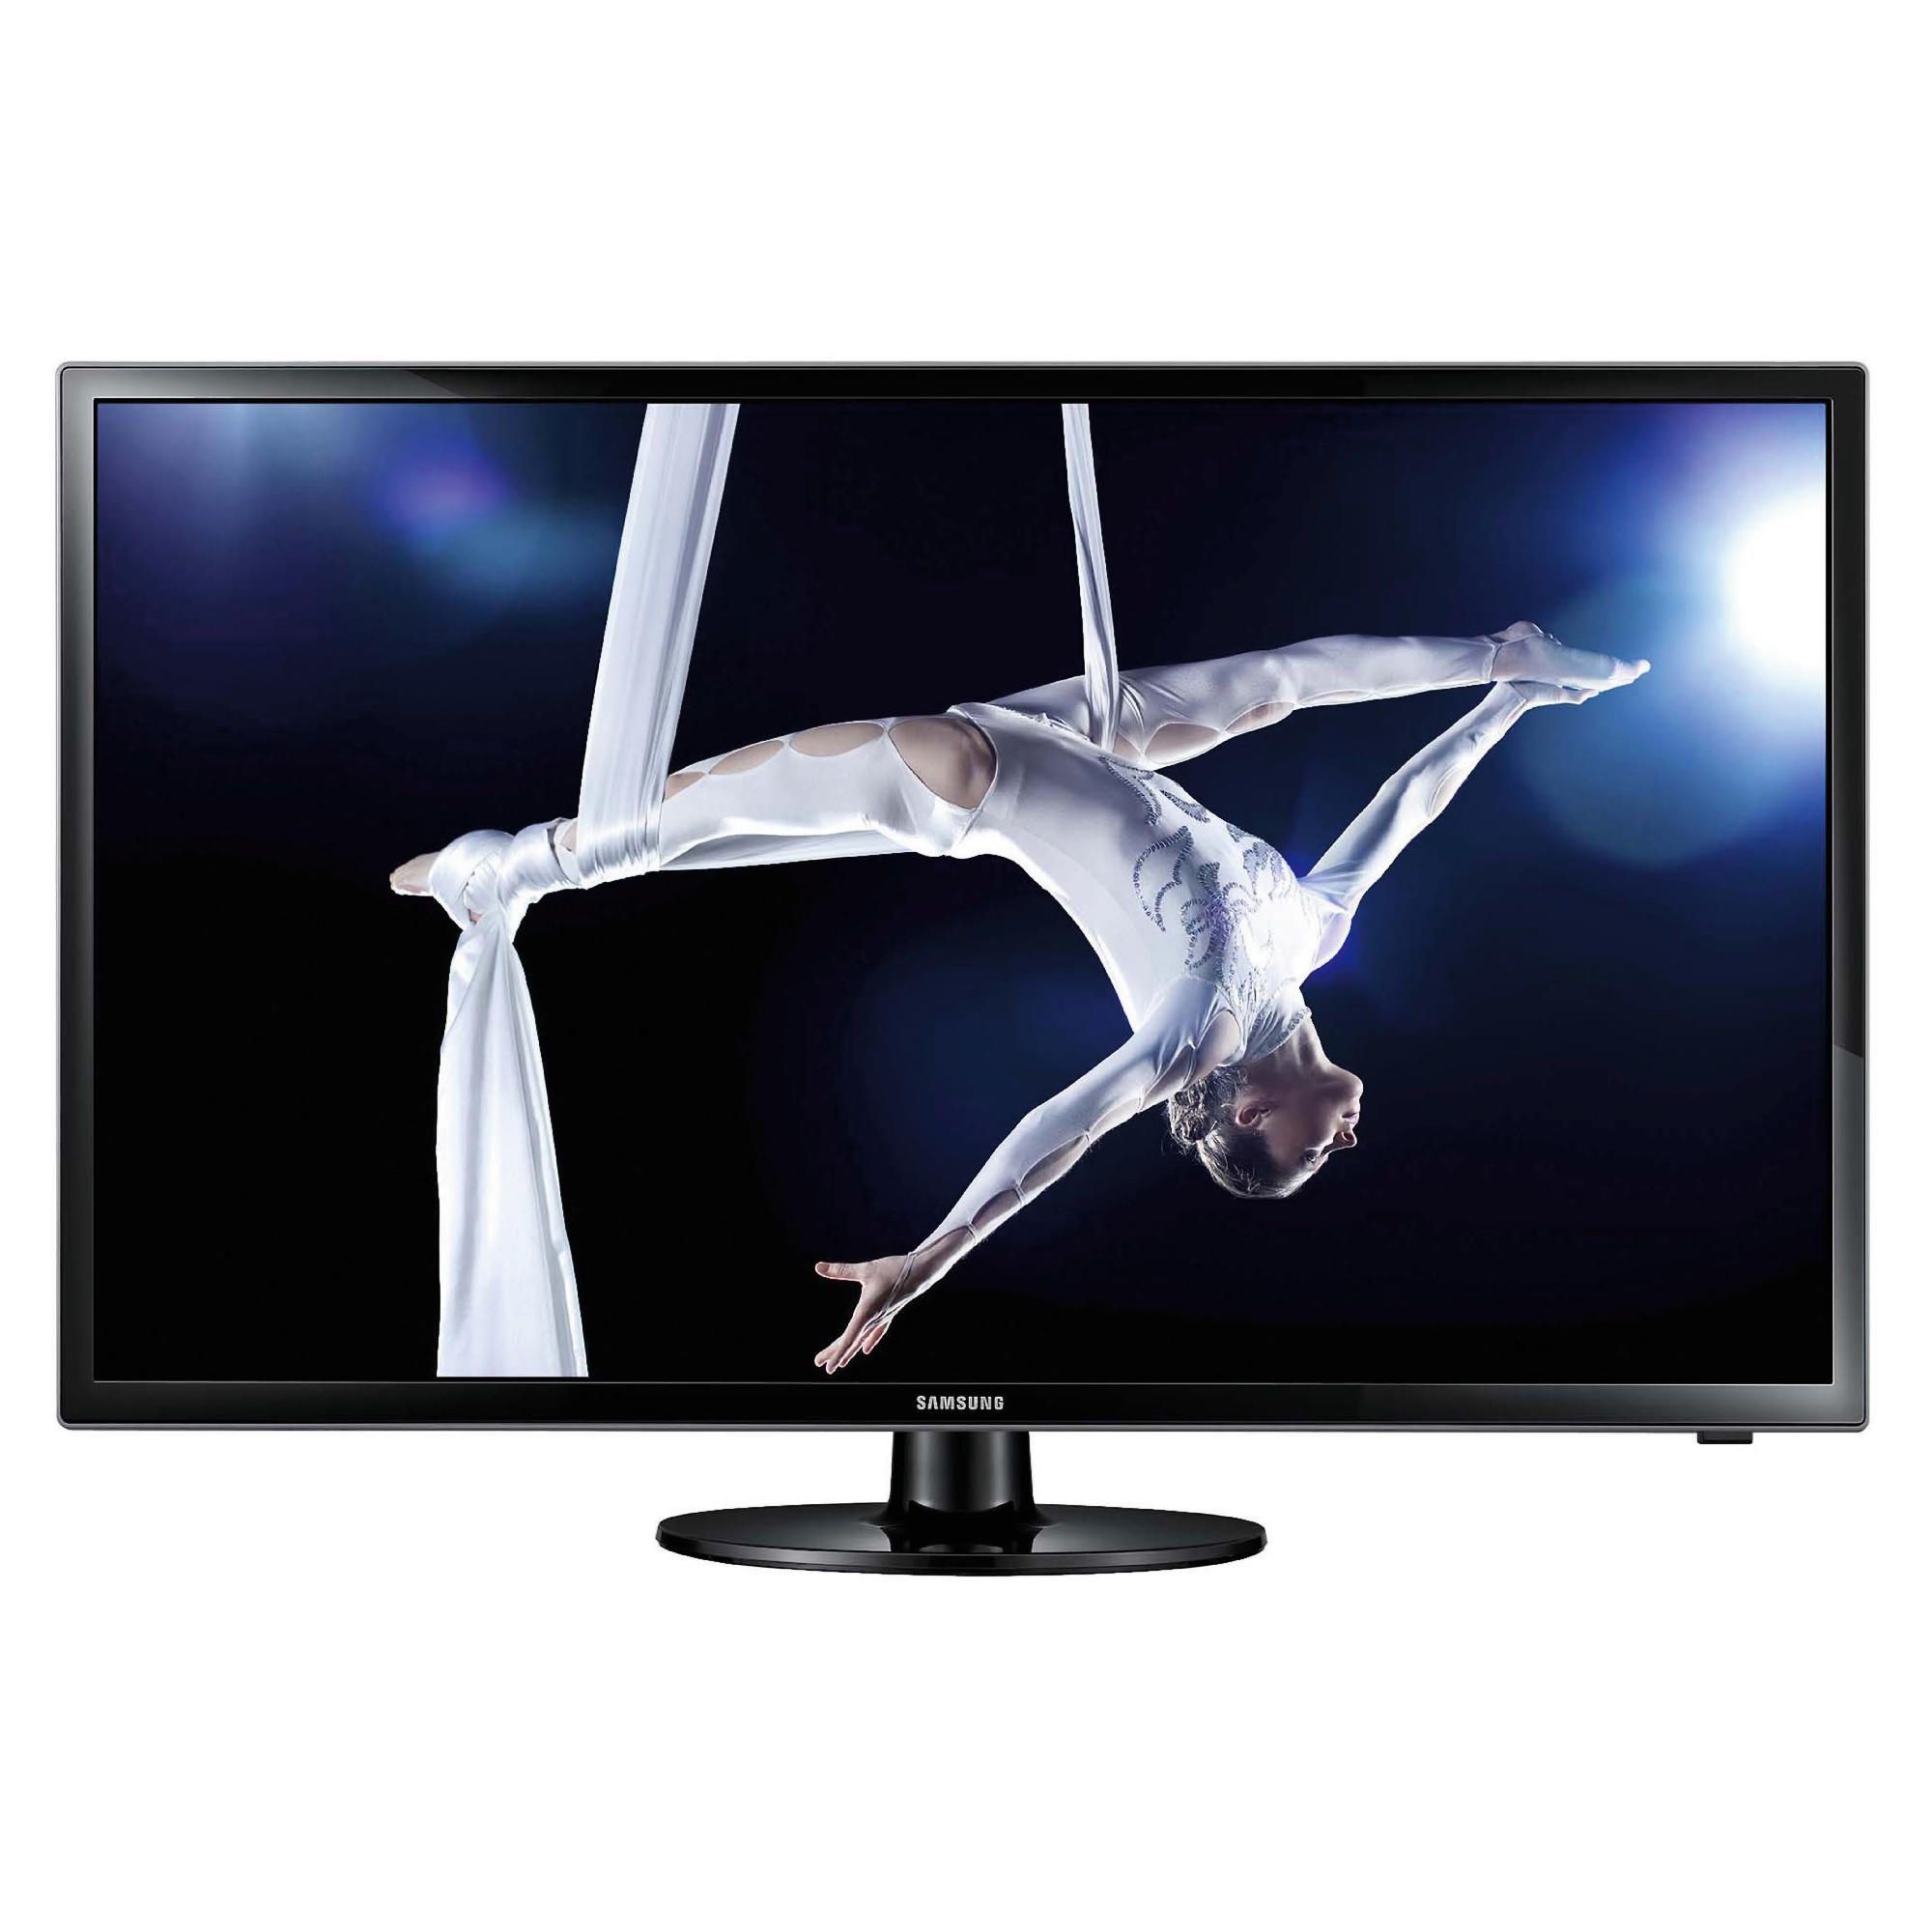 Samsung UE32F4000 32 inch HD Ready 720p LED TV with Freeview